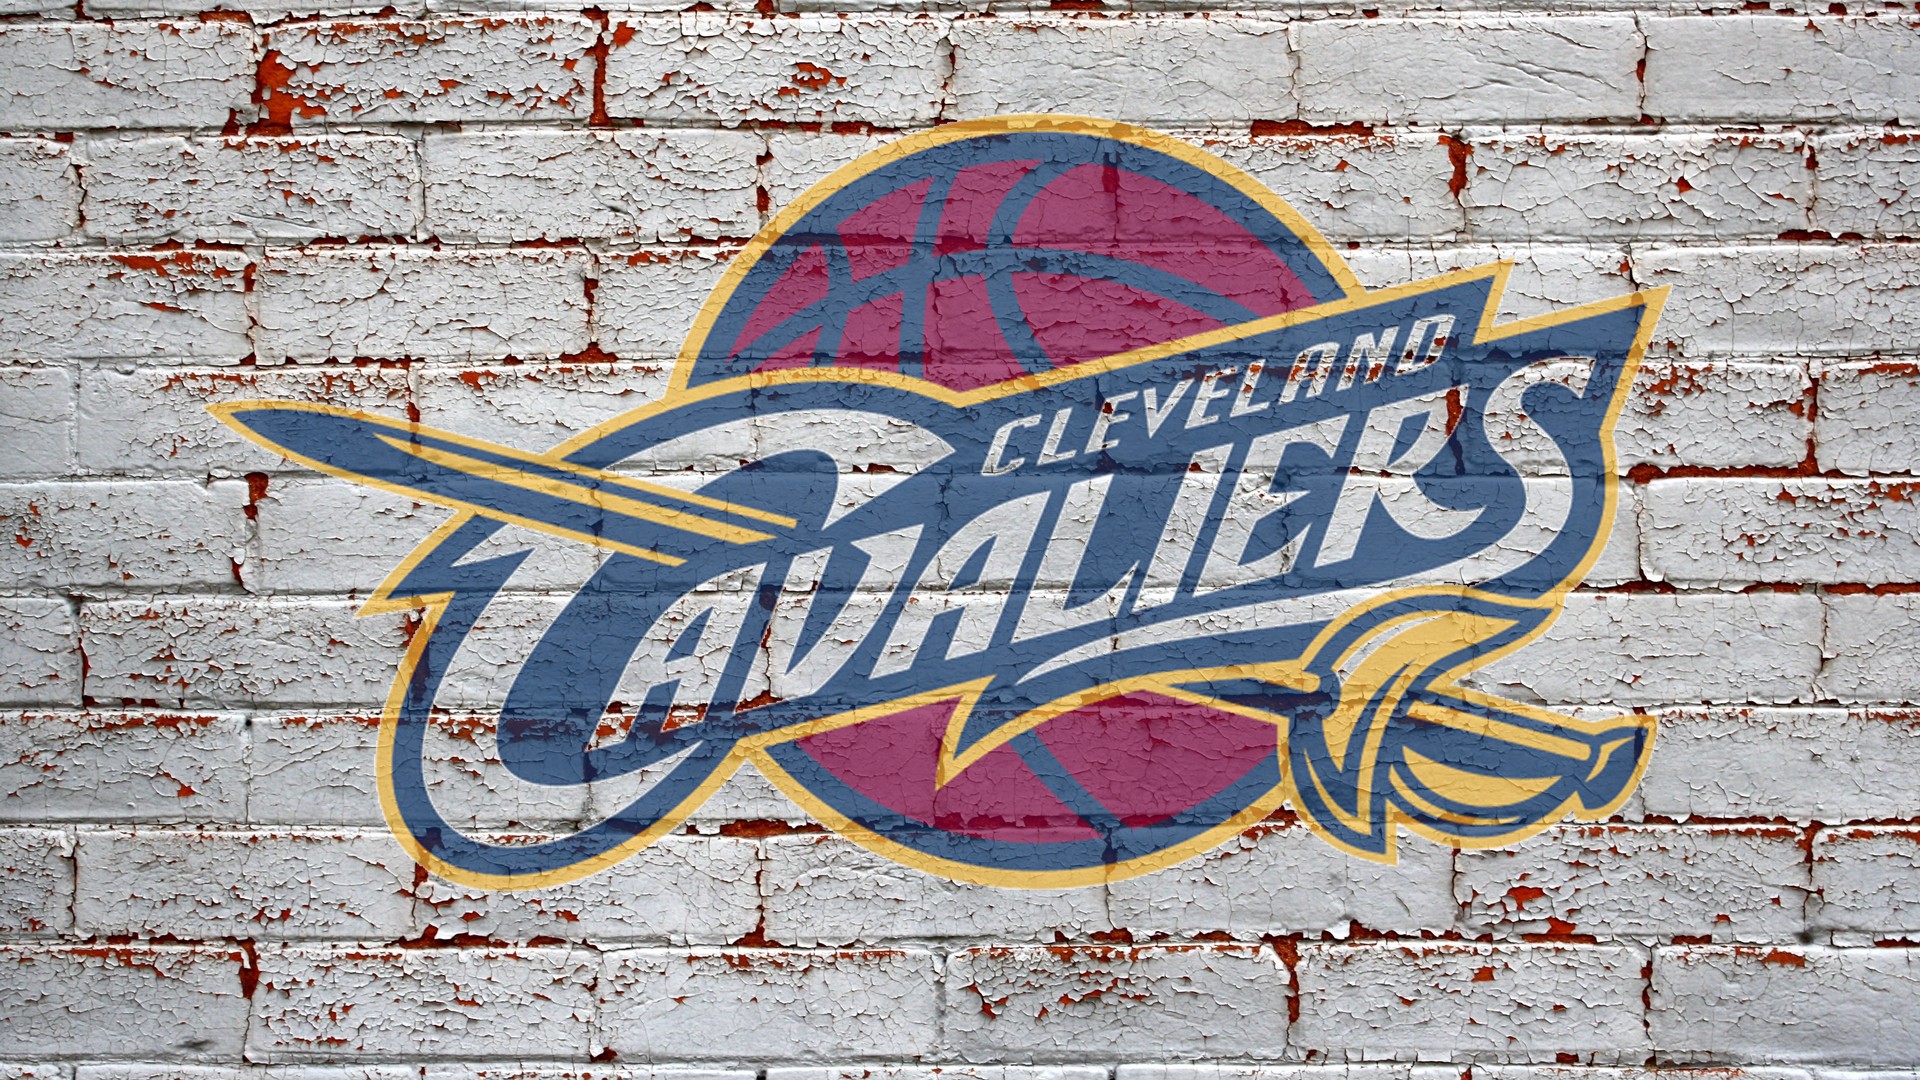 Cleveland Cavaliers Wallpaper For iPhone Z7g Px Kb